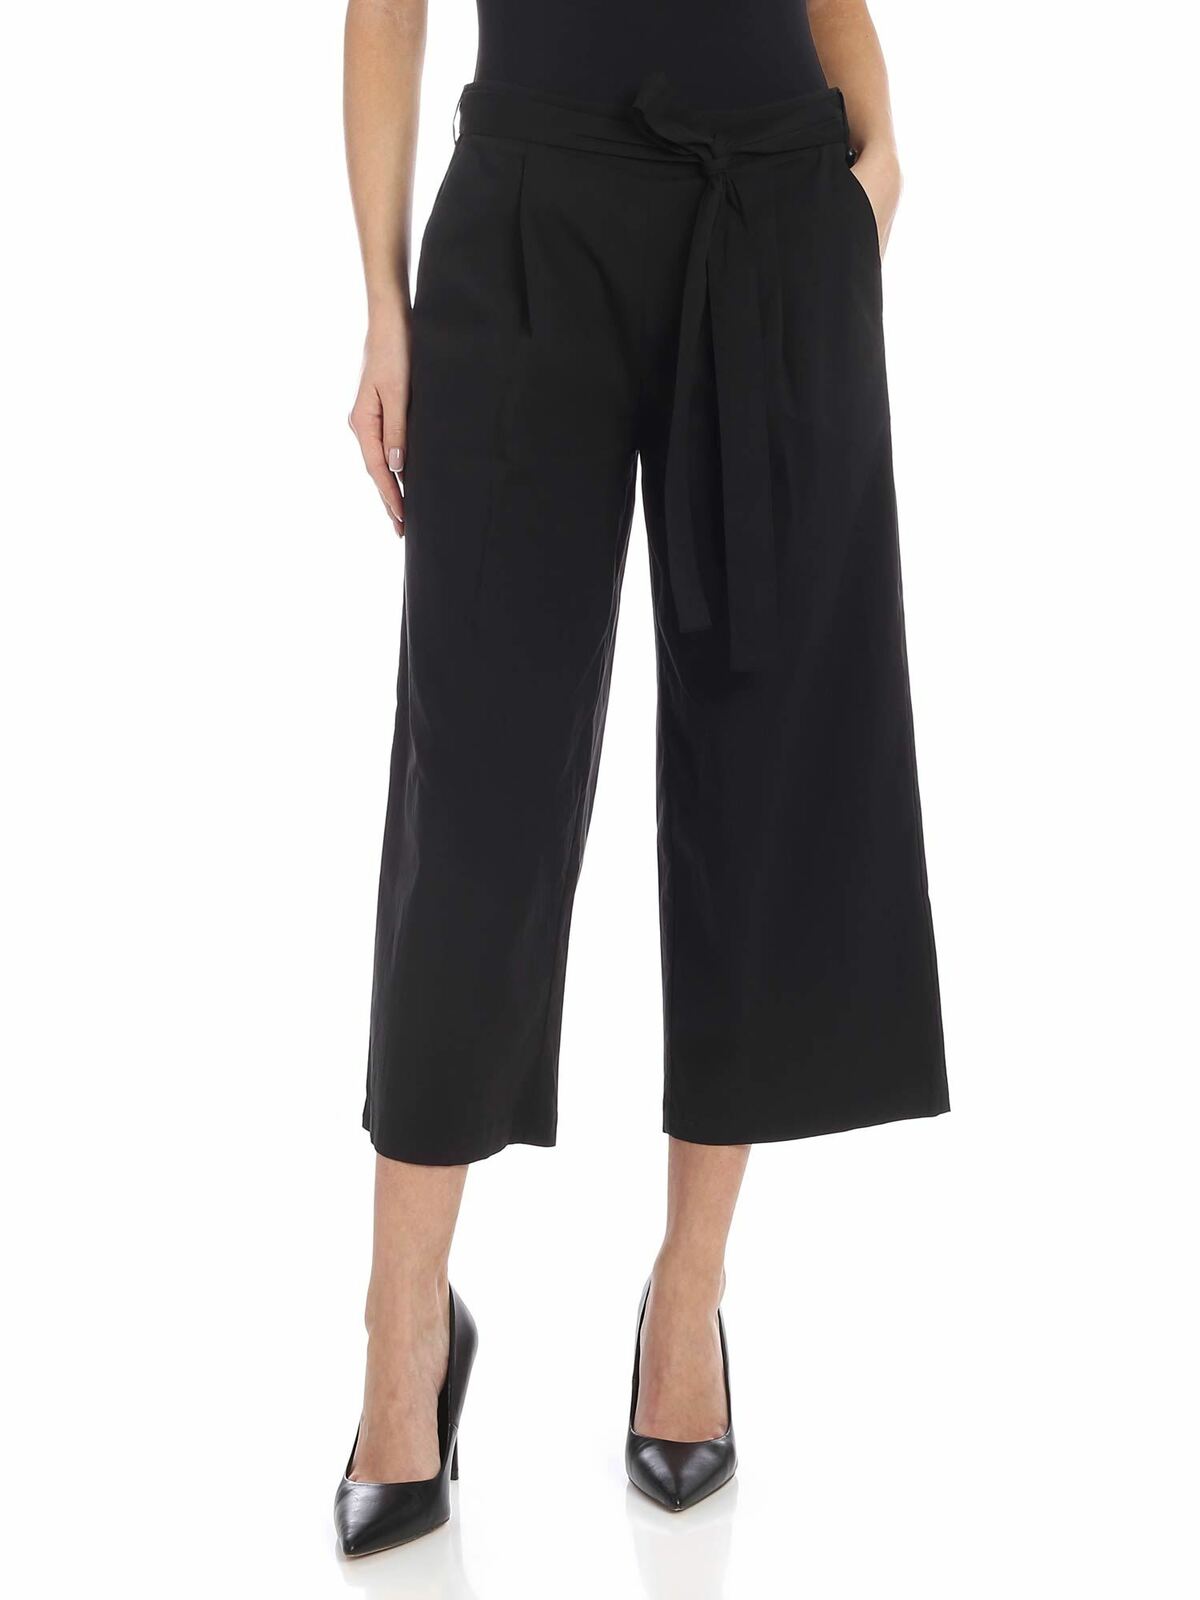 Dkny Crop Pants In Black With Bow At The Waist